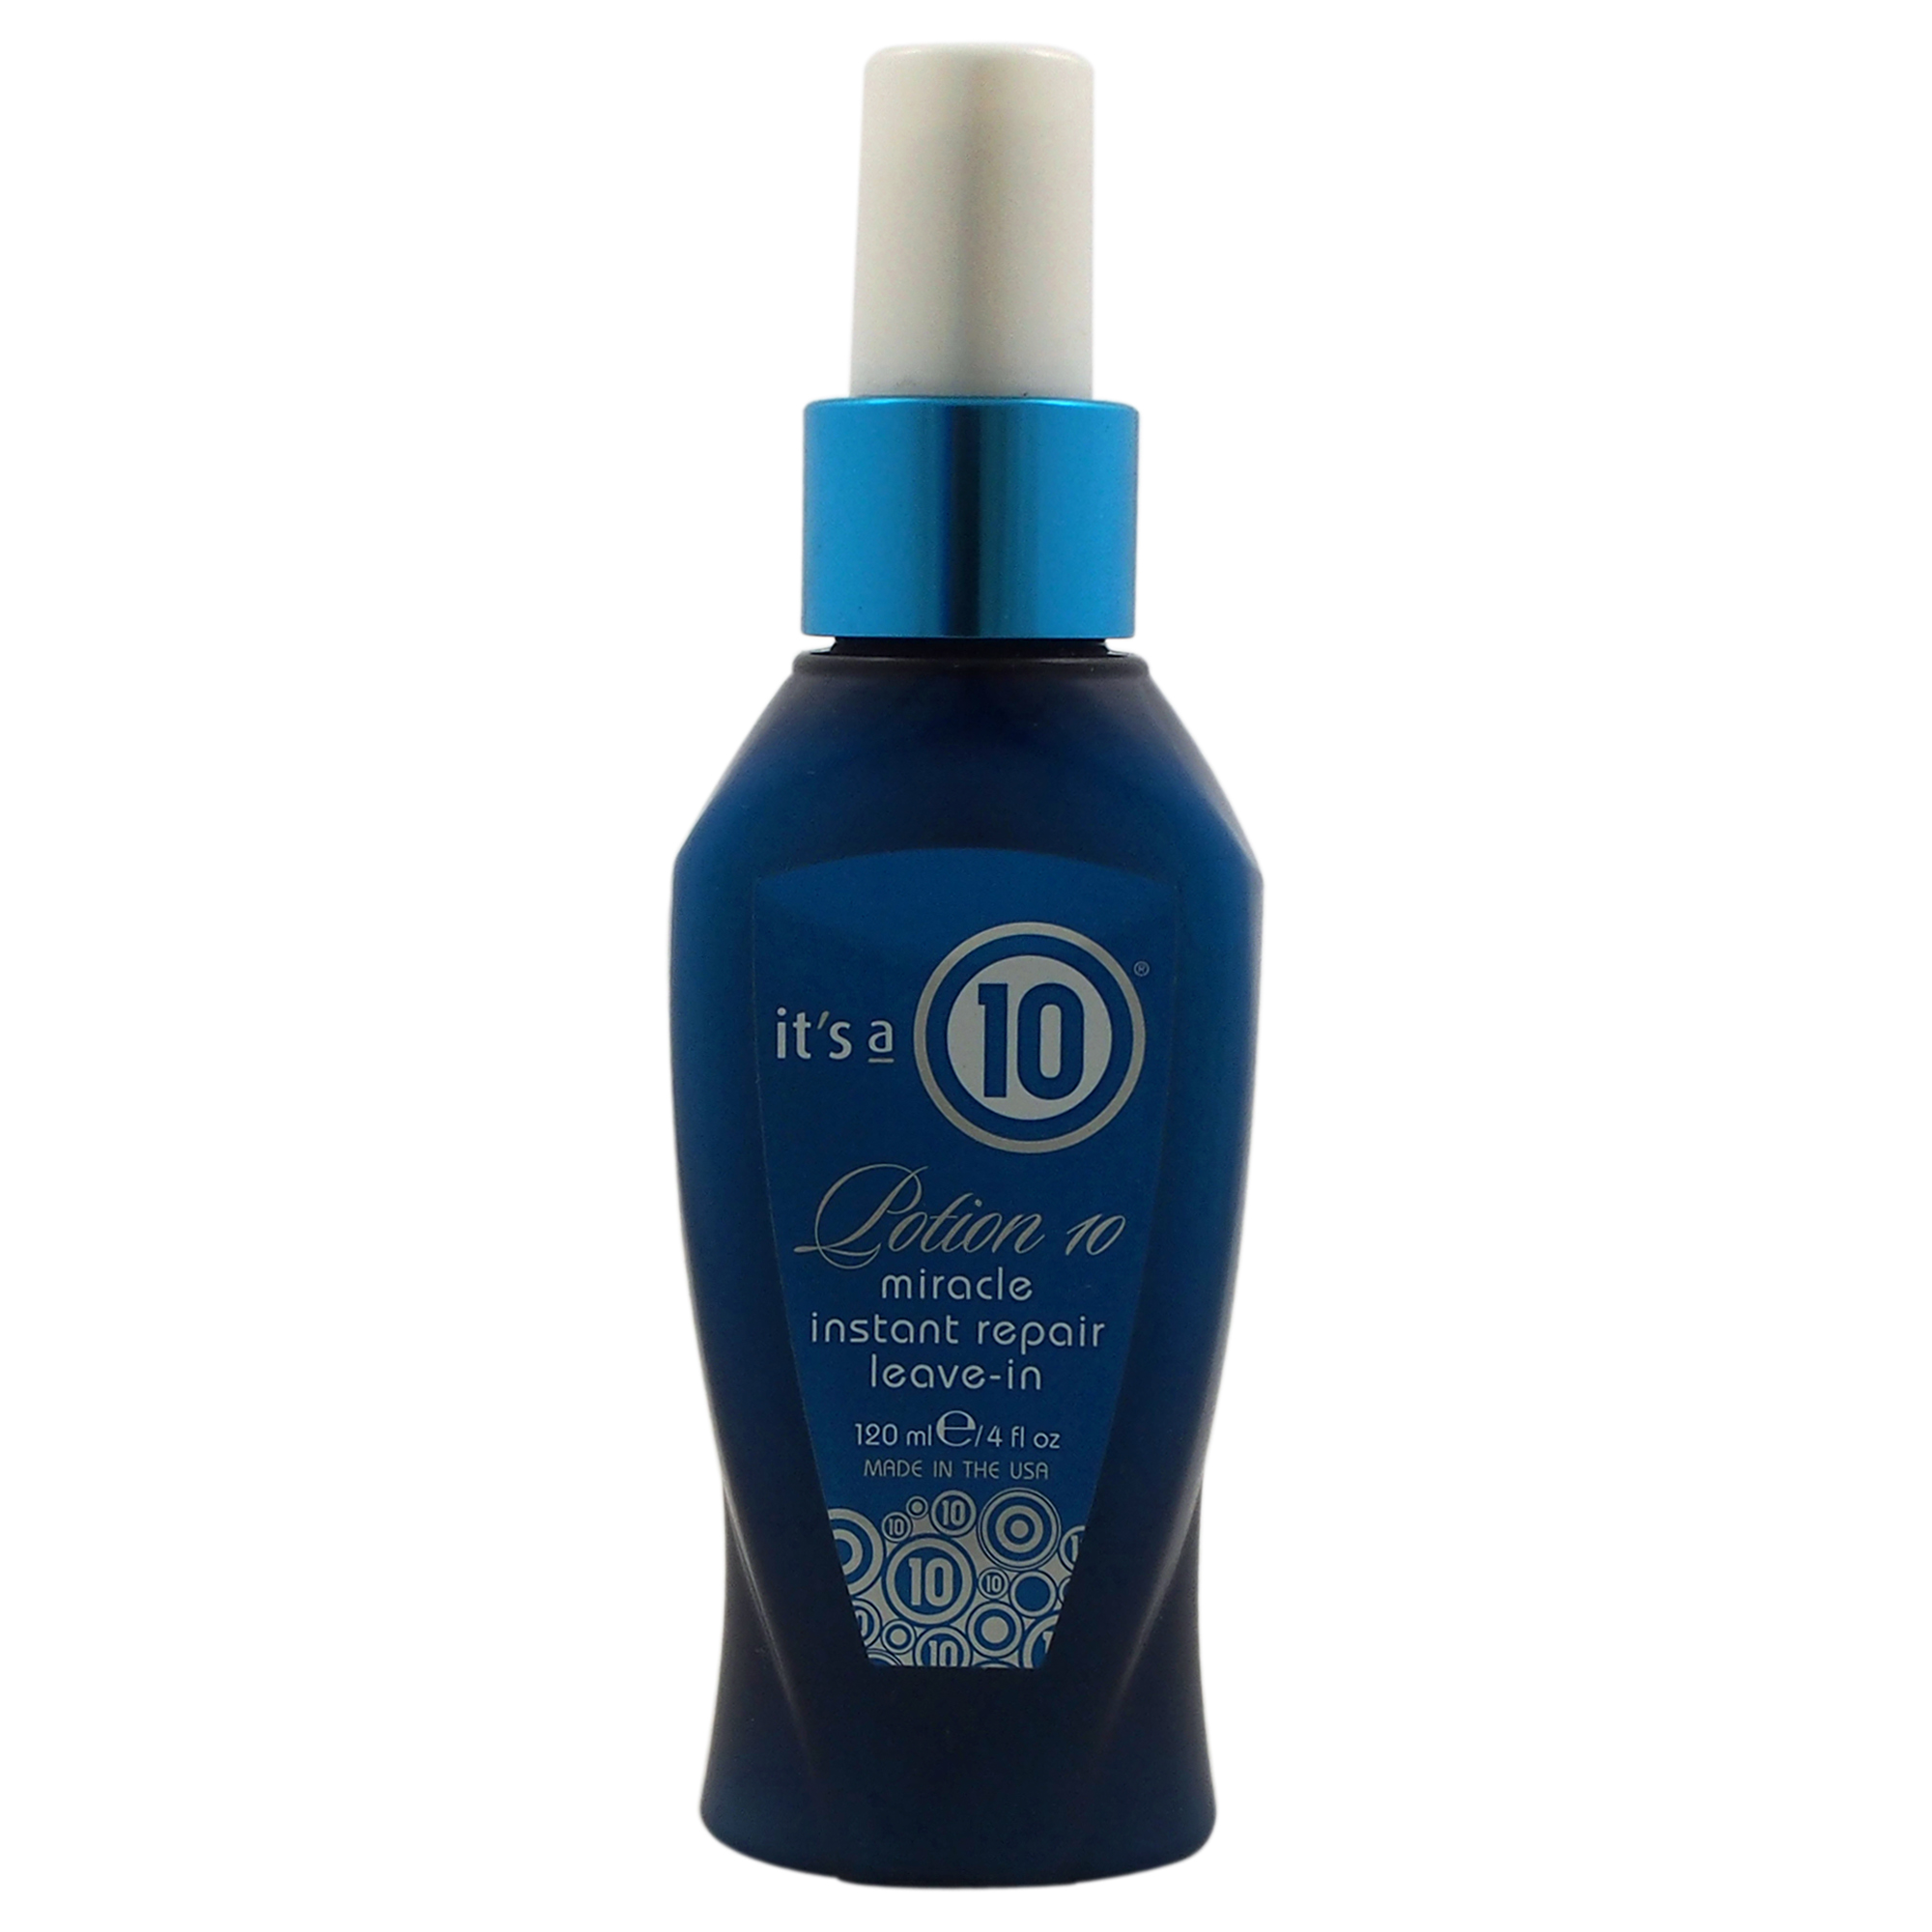 Its a 10 Potion 10 Miracle Instant Repair Leave-In Treatment by  for Unisex - 4 oz Treatment